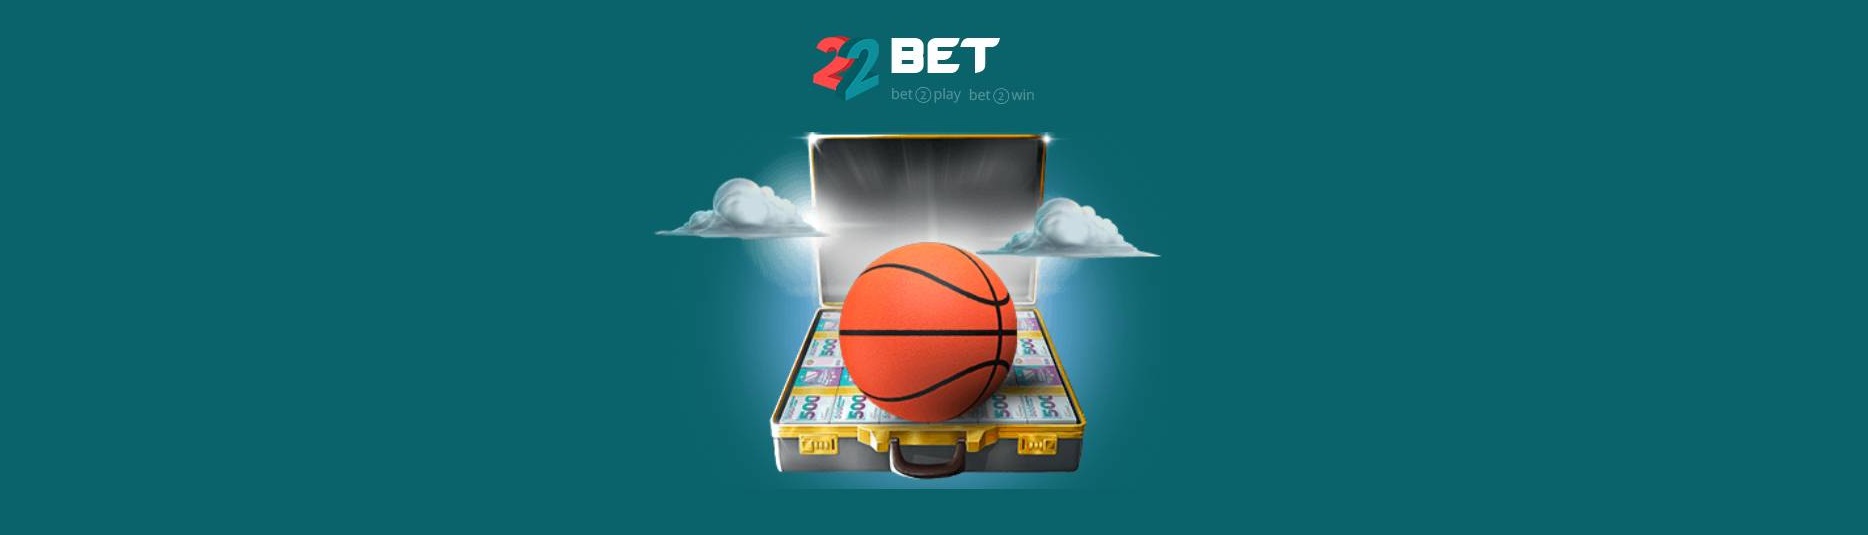 Bet22 Online Casino: The Story Of Development As A Merge Of High-Quality Service And Enormous Rewards